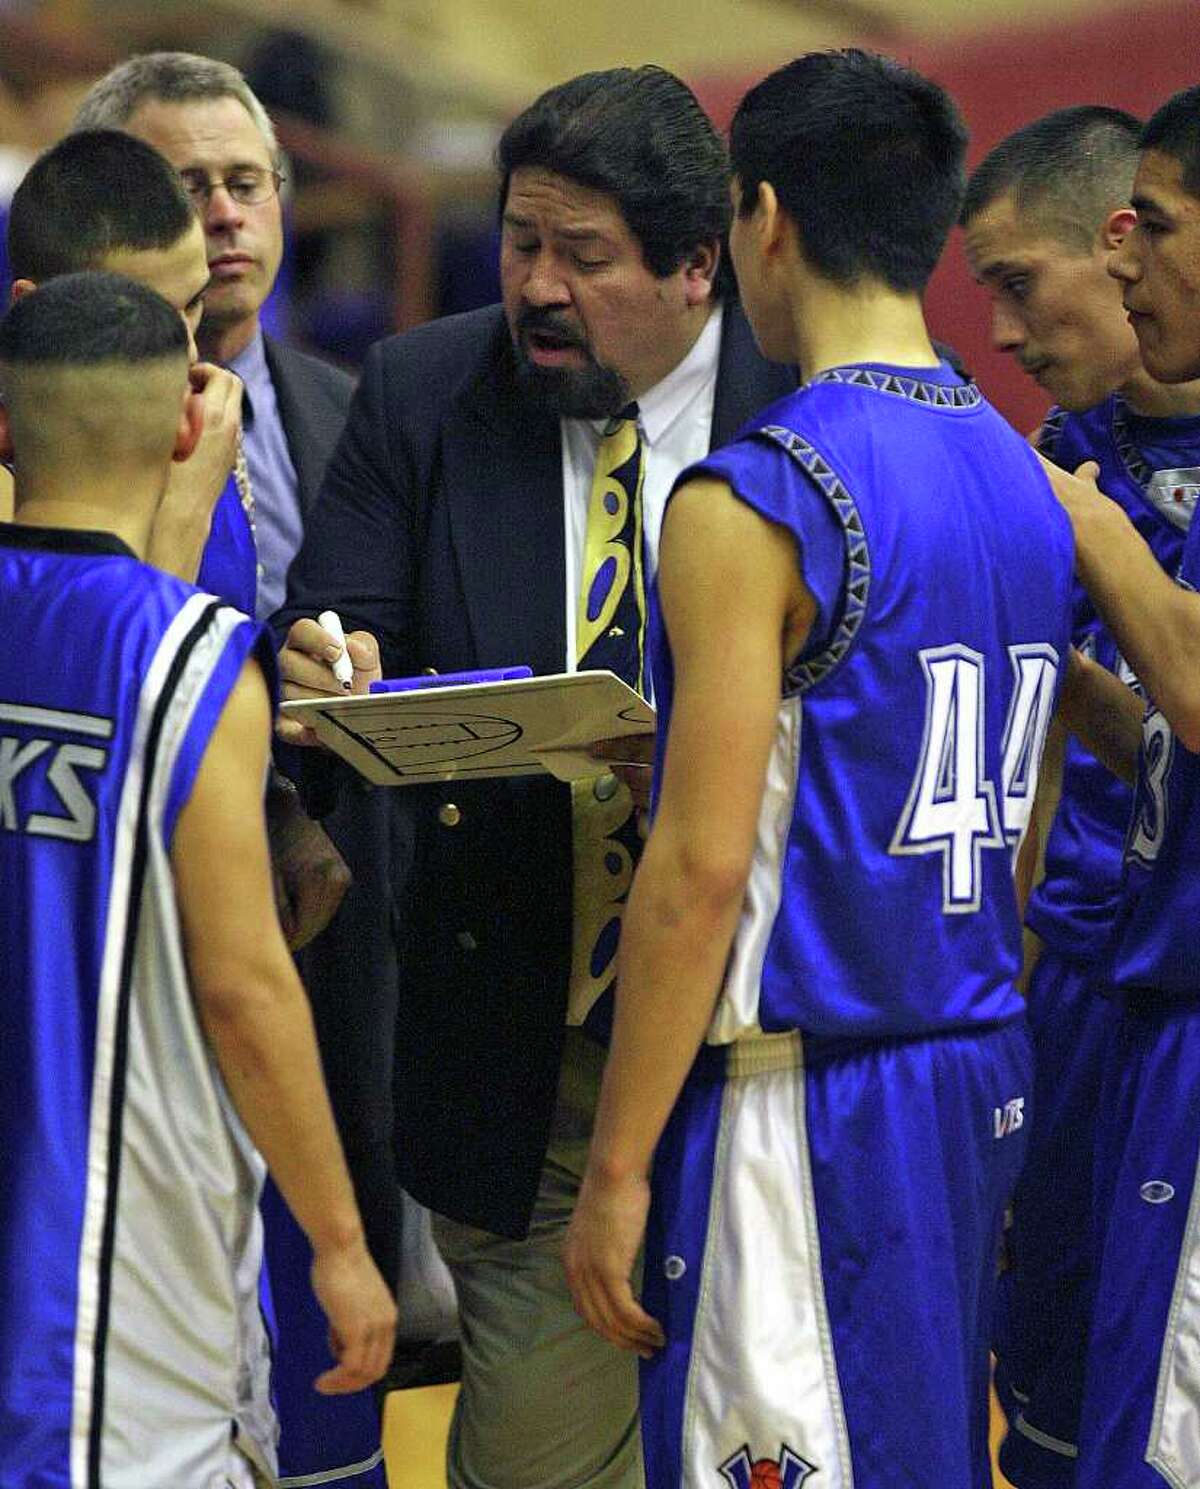 CONEXION Lanier coach Rudy Bernal draws up a play for his team against Brackenridge Friday night at Alamo Convocation Center. Tom Reel/Staff January 12, 2007.